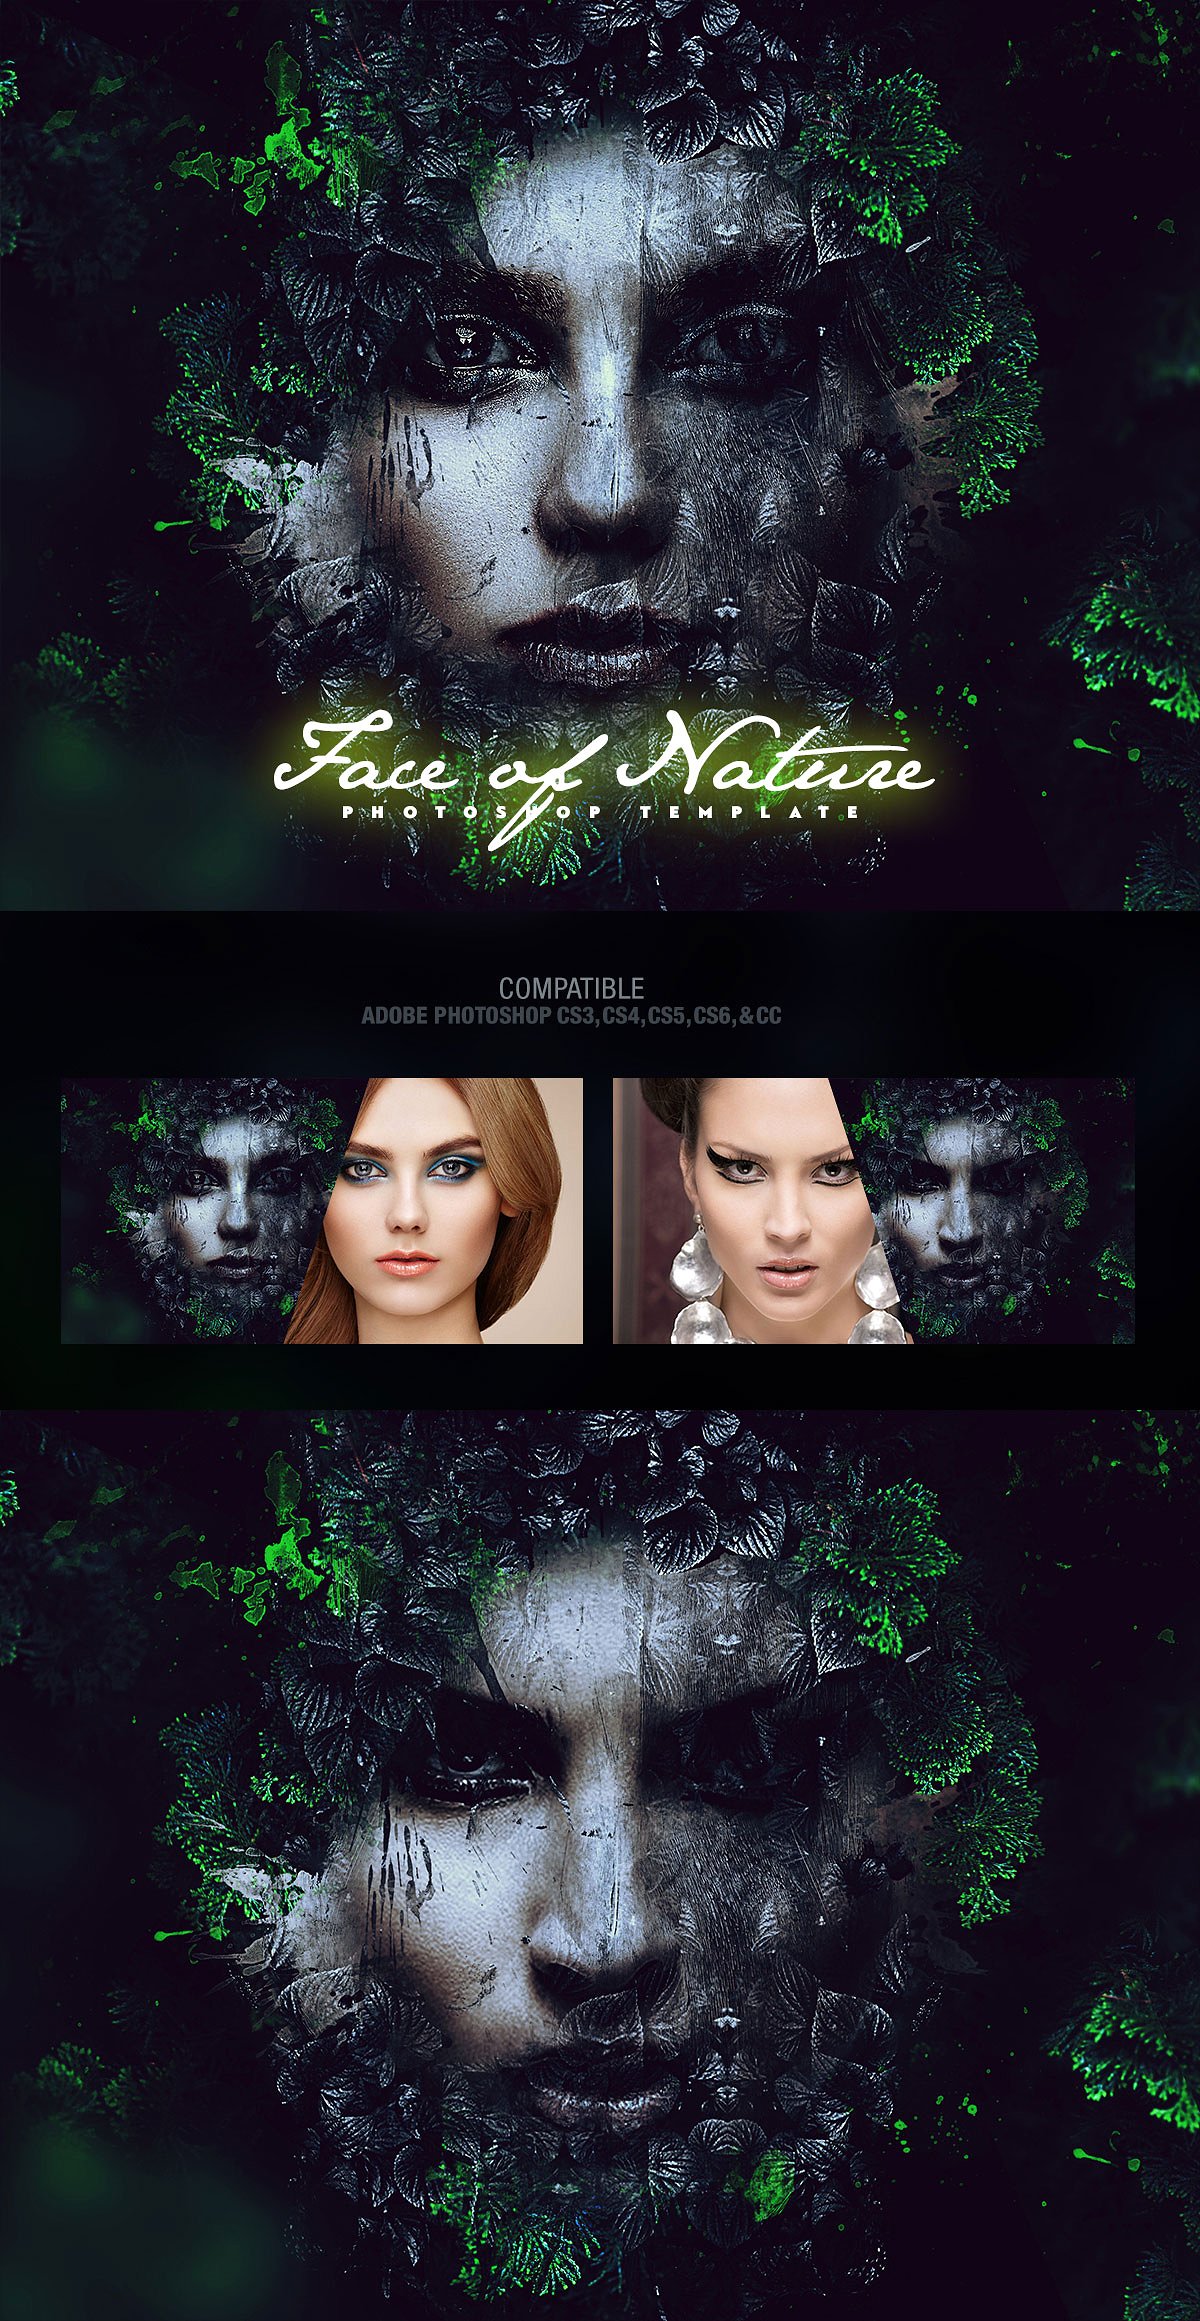 face-of-nature-photo-template-(design-by-amorjesu)-.jpg